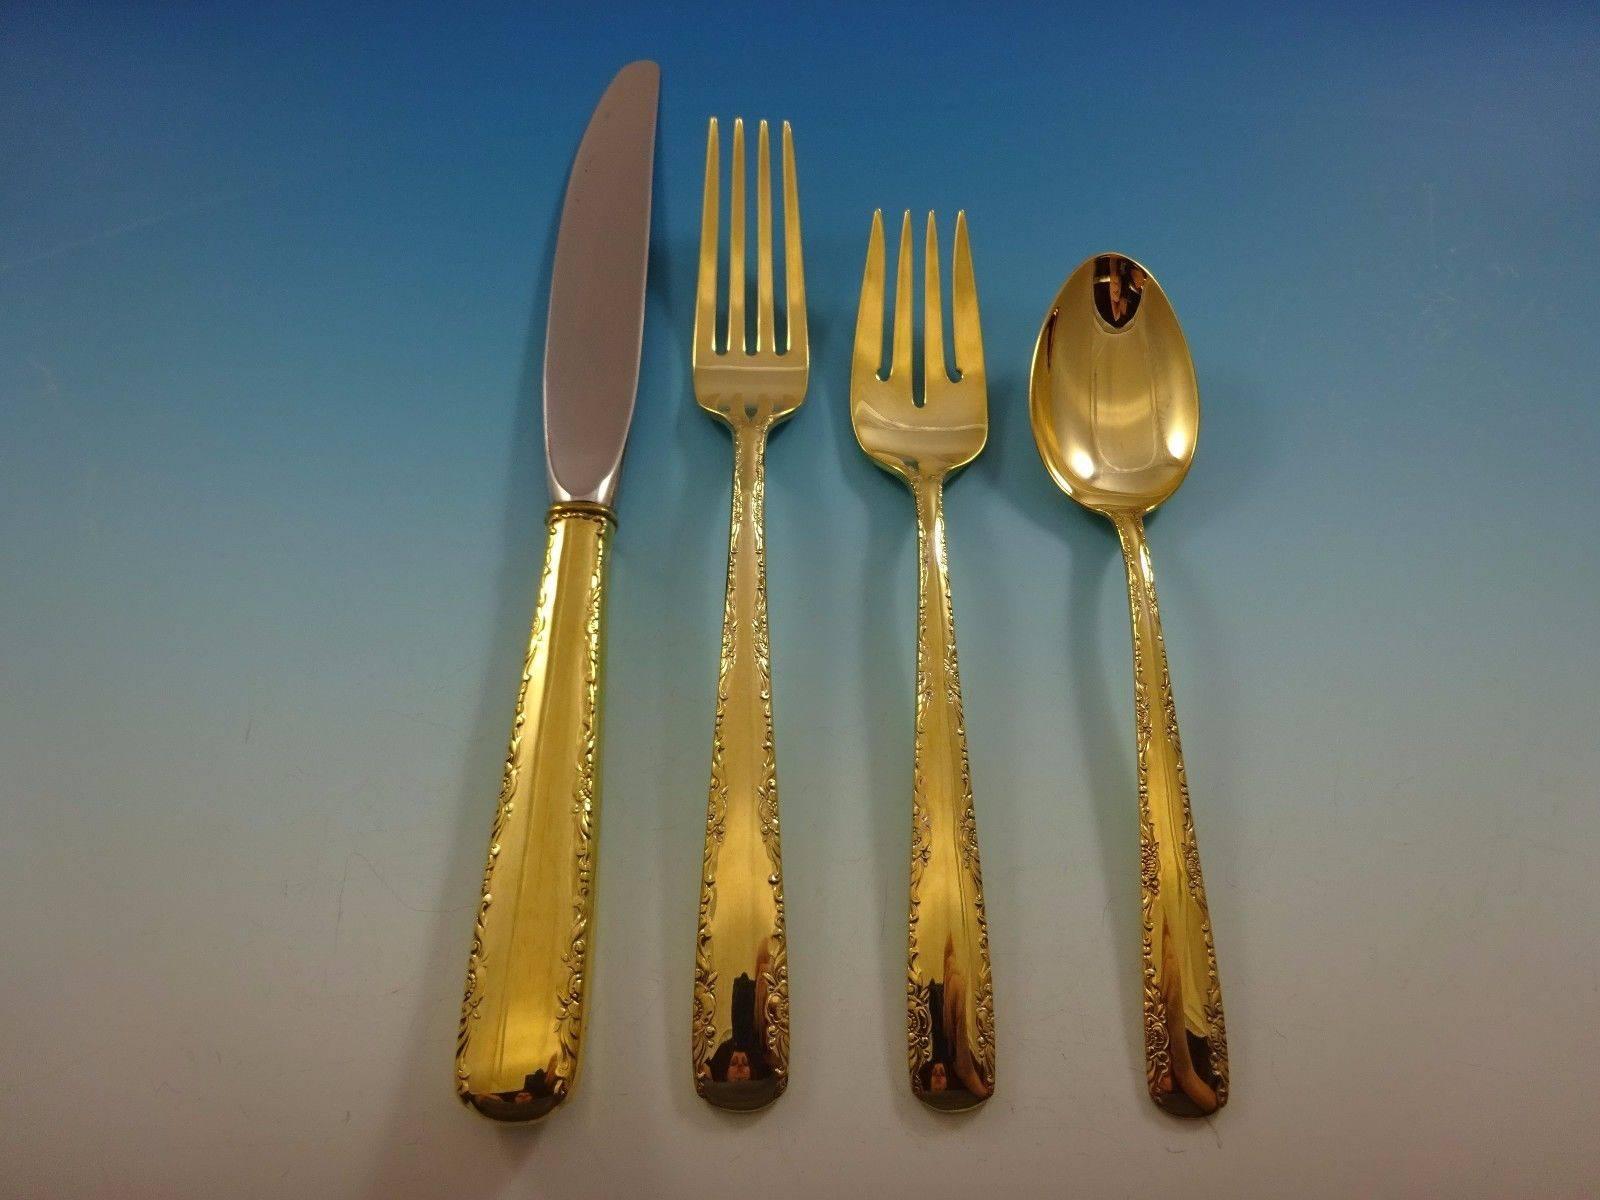 Elegant Camellia gold by Gorham Sterling Silver flatware set 48 pieces. Gold flatware is on trend and makes a bold statement on your table. 

This set is vermeil (completely gold-washed) and includes:
 
12 knives, 8 3/4